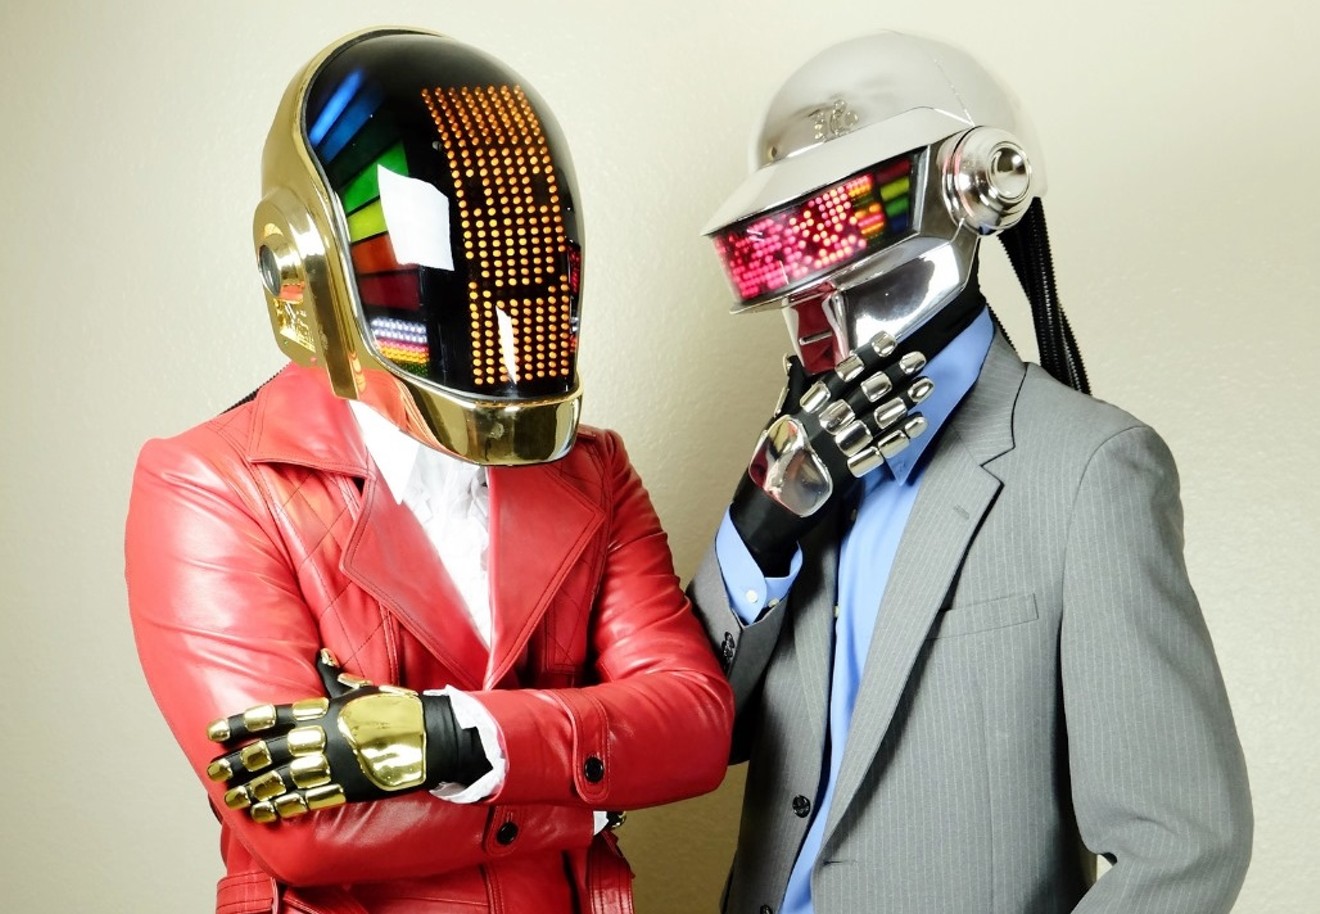 Daft Punk tribute One More Time are scheduled to perform on Friday, November 25, at The Van Buren.